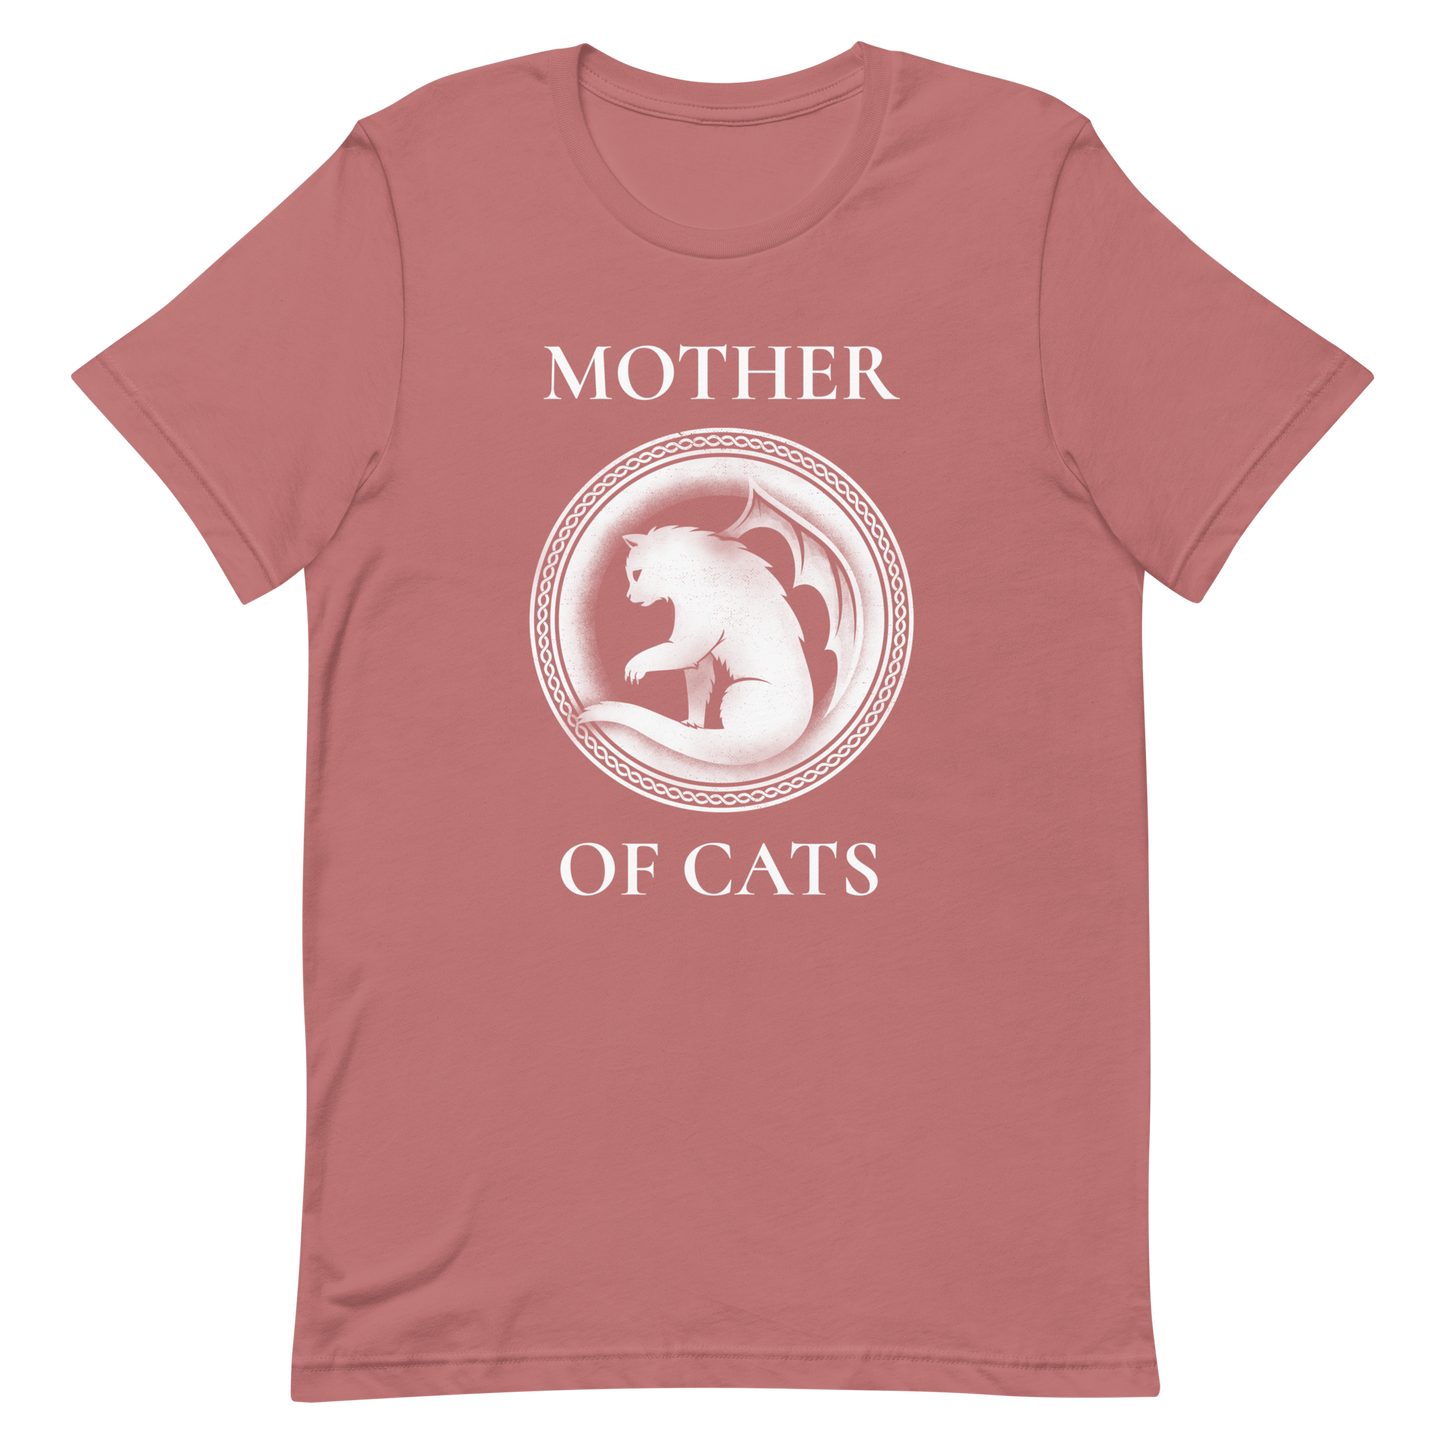 mother of cats - Unisex Classic Tee